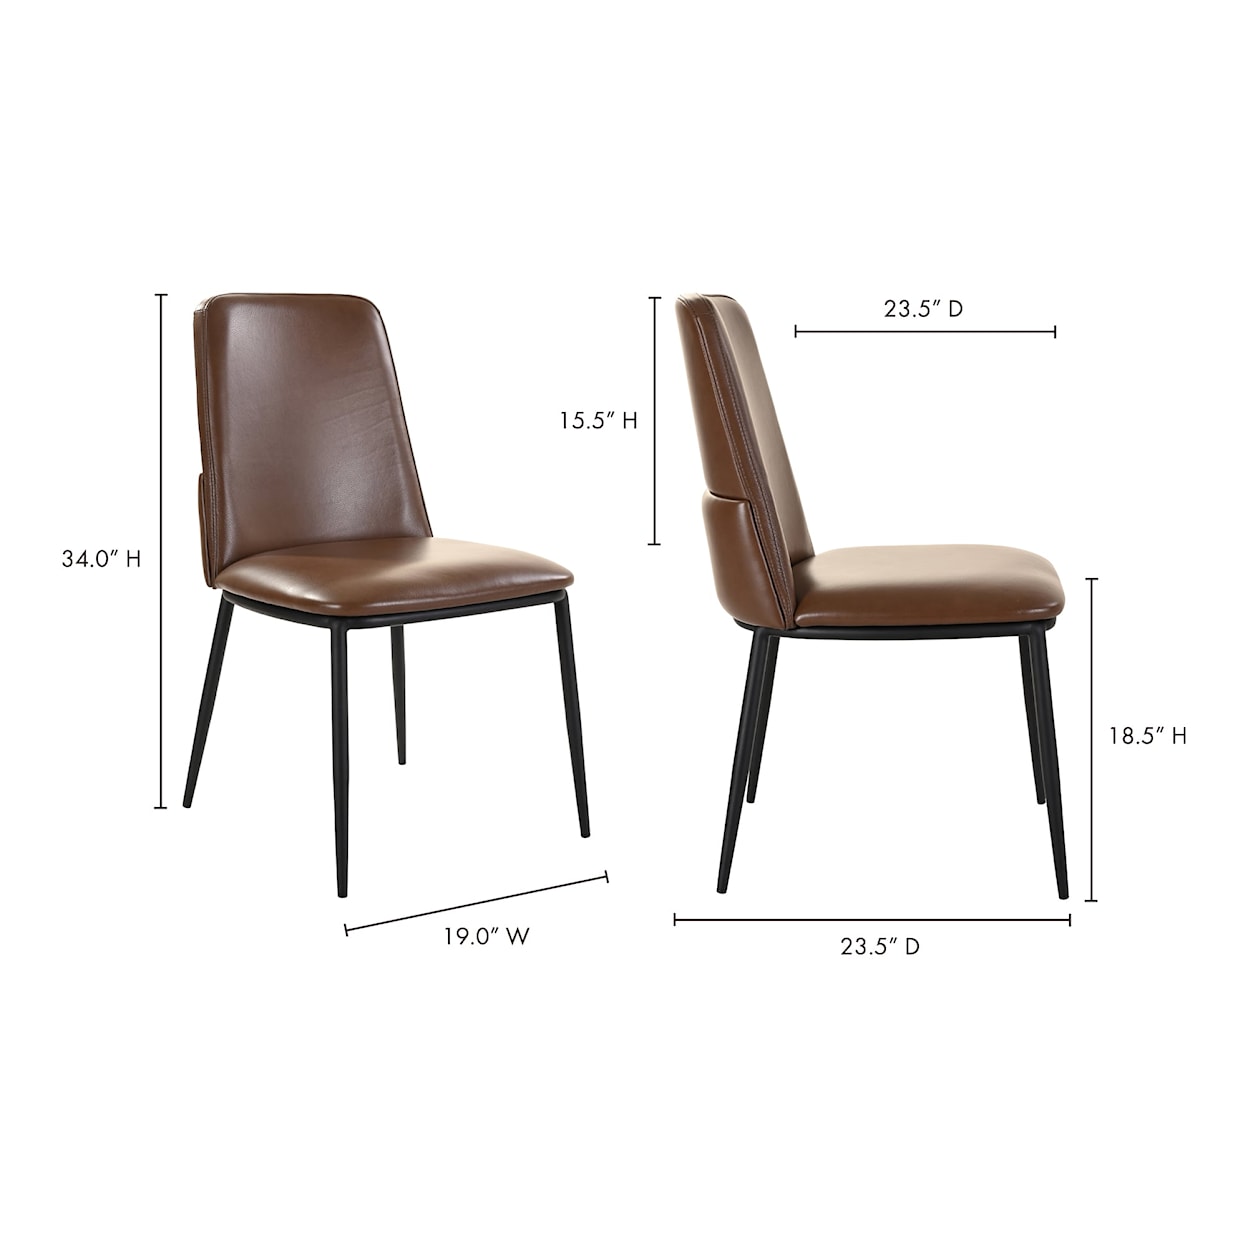 Moe's Home Collection Douglas Leather Dining Chair